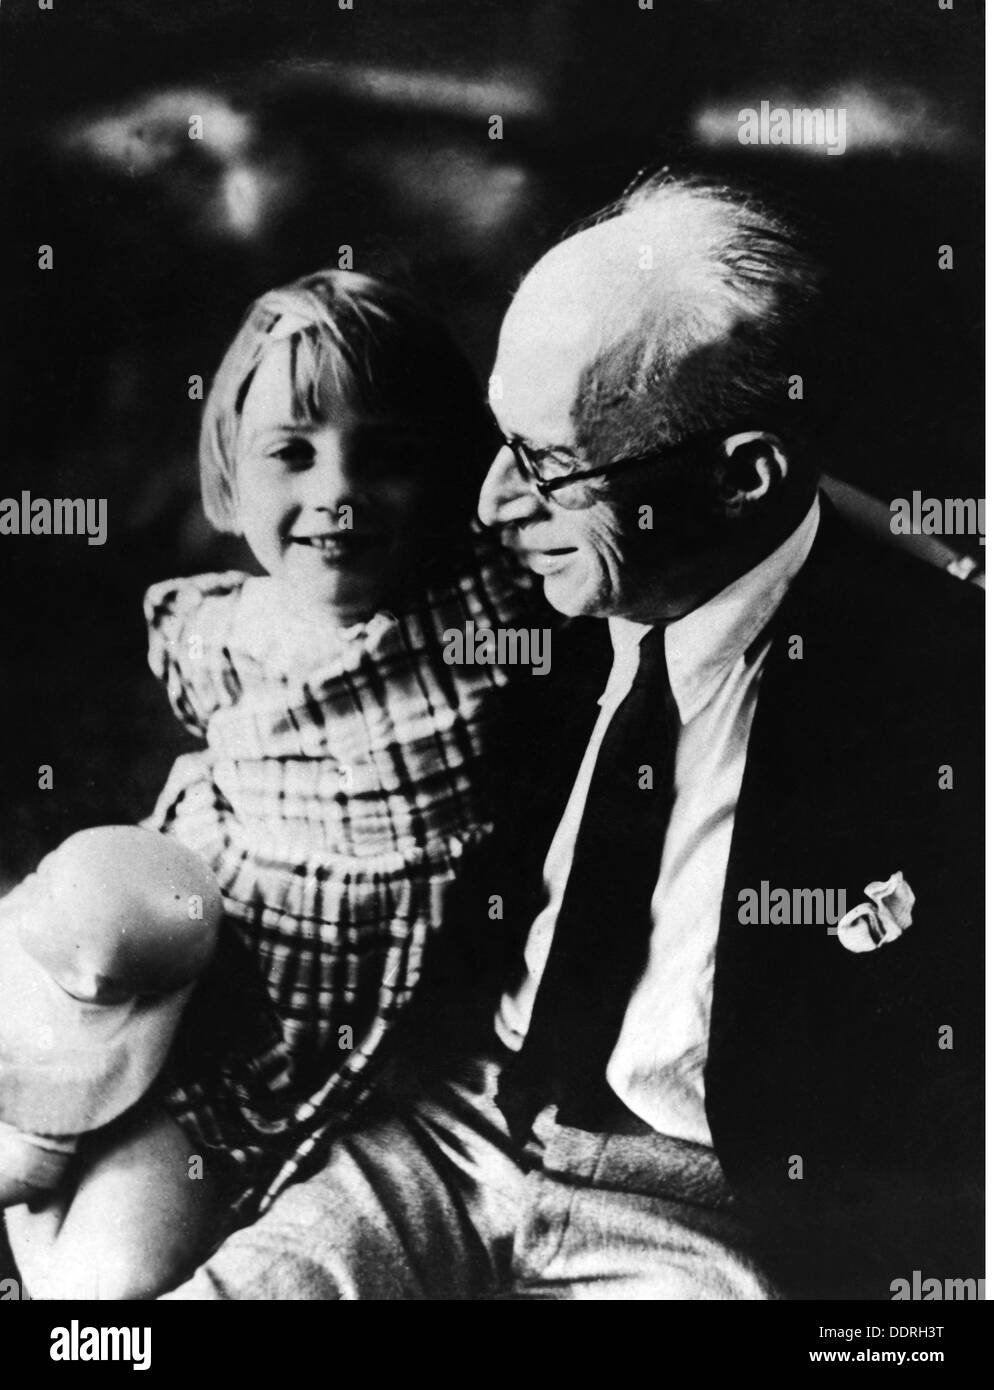 Walden, Herwarth, 16.9.1878 - 31.10.1941, German author / writer and composer, with daughter Sina, Moscow, 1940, Stock Photo